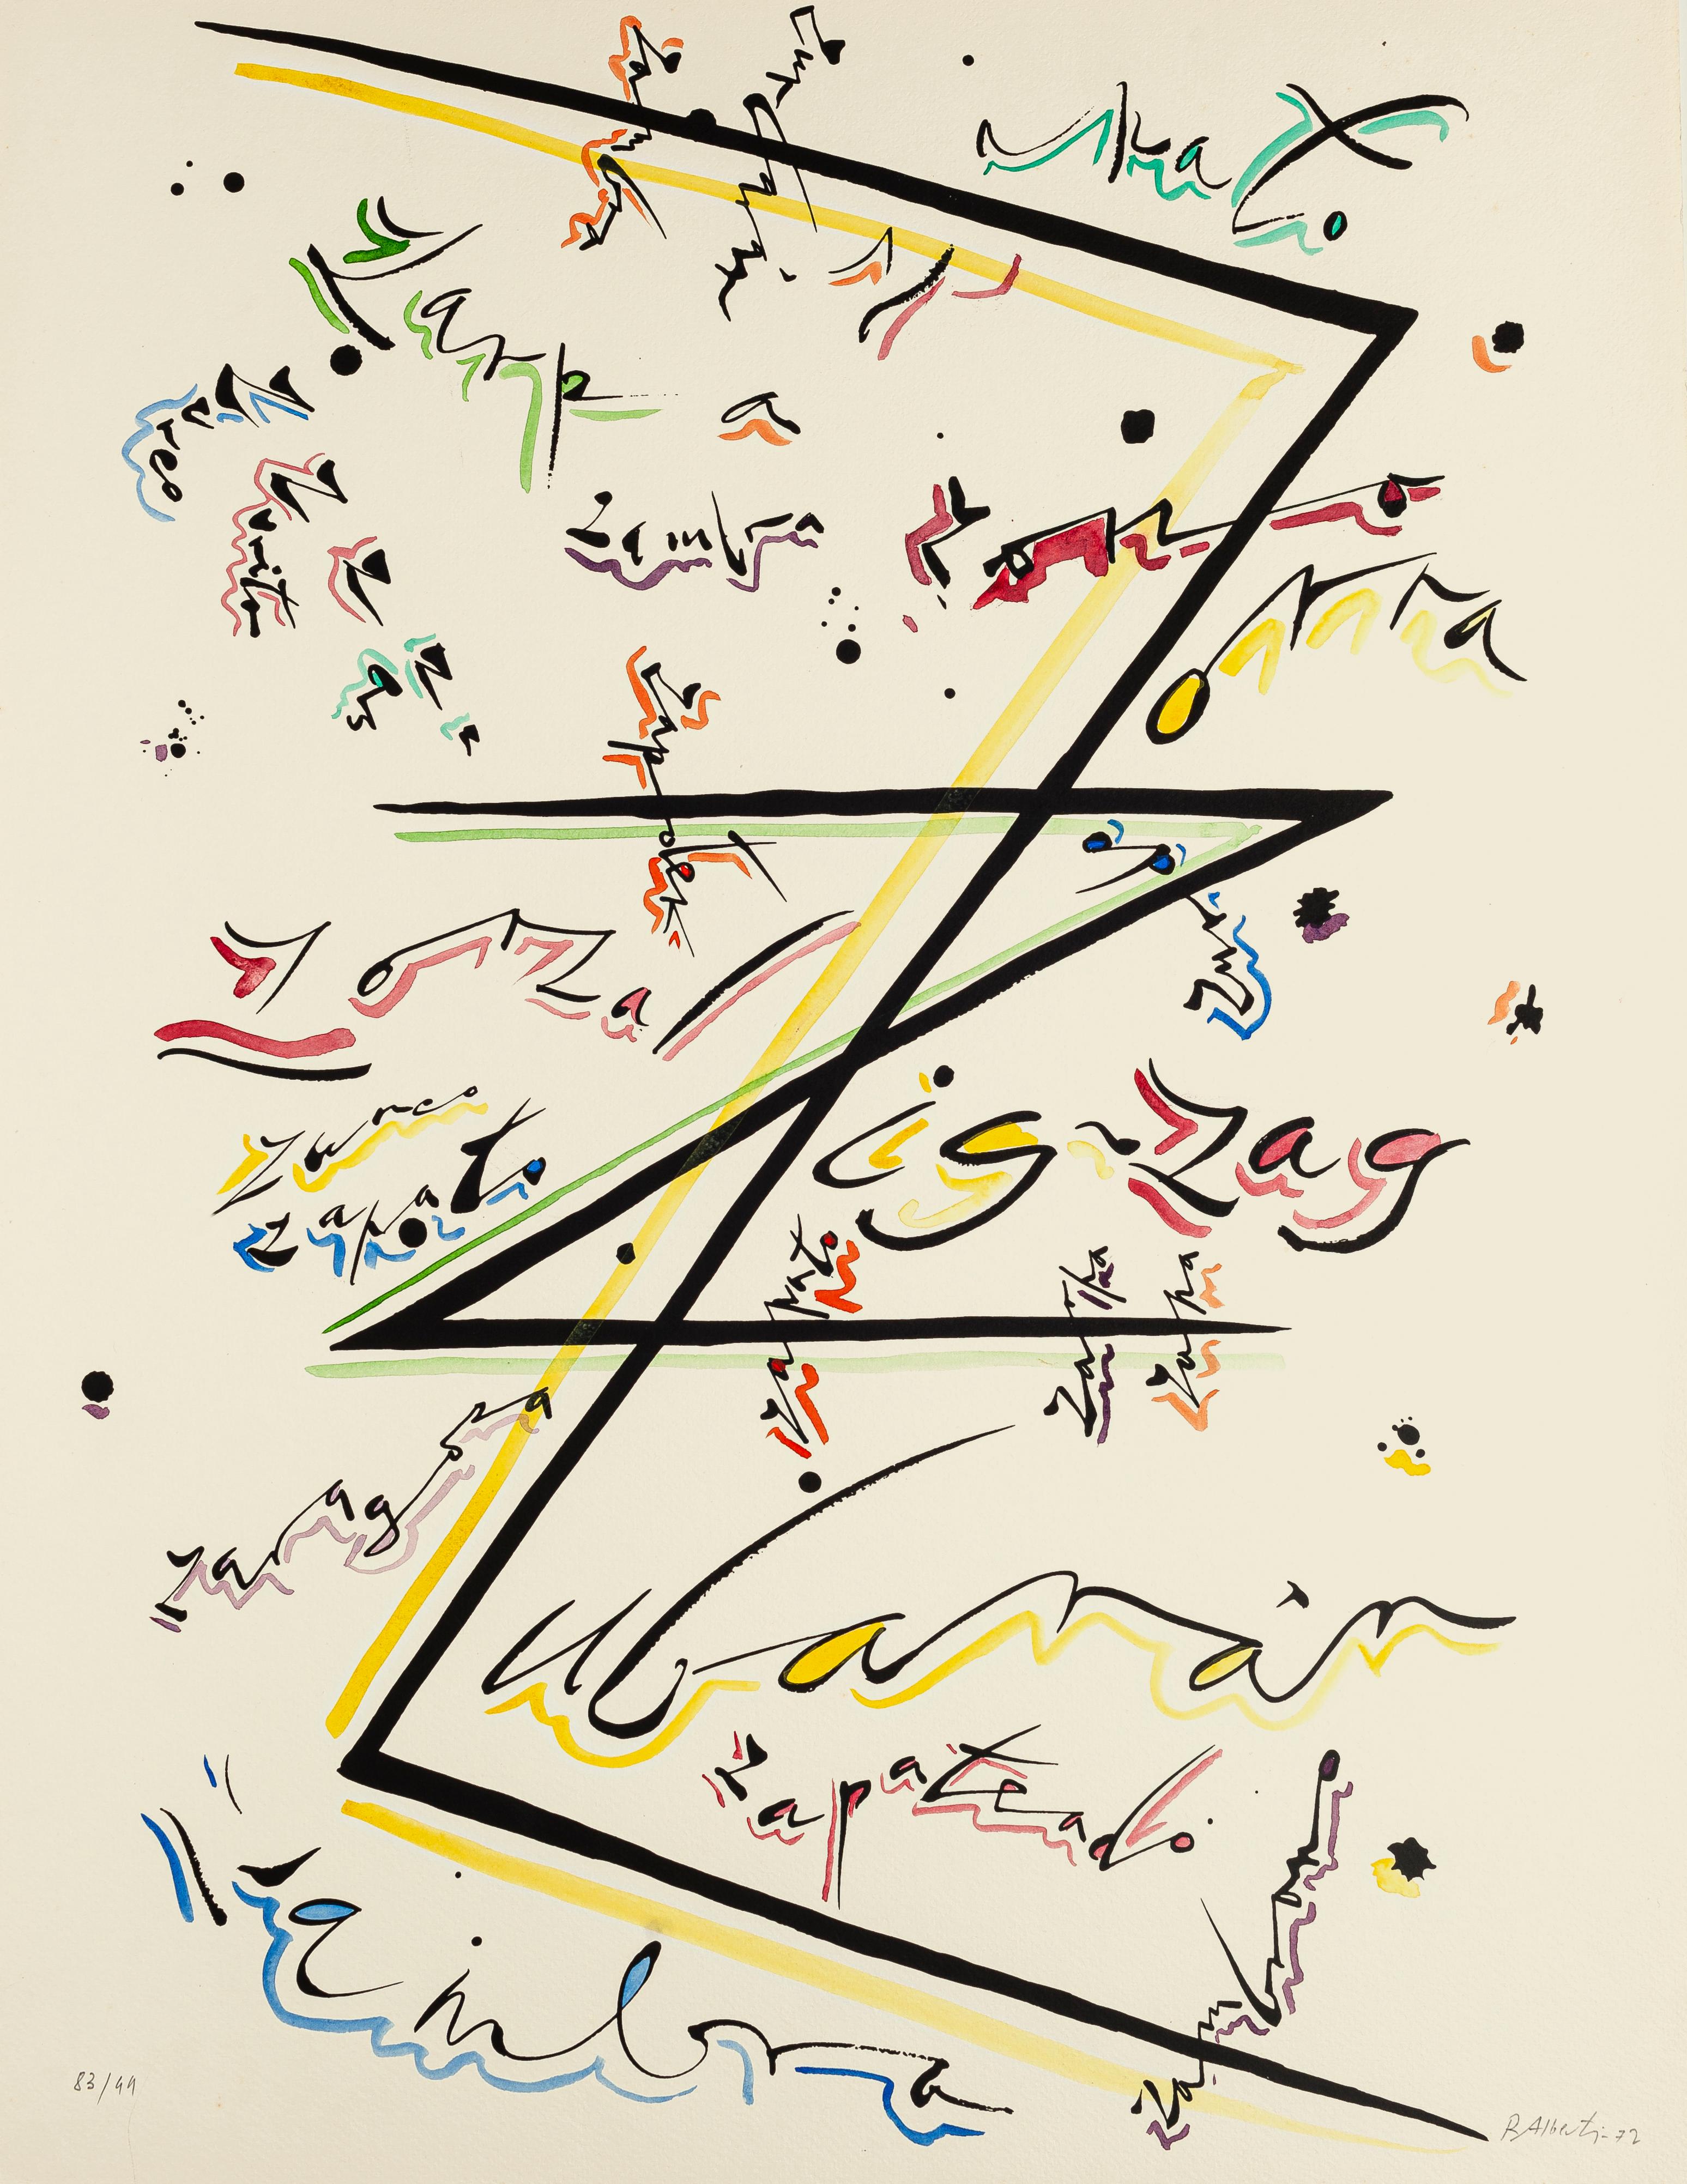 Letter Z - Hand-Colored Lithograph by Raphael Alberti - 1972